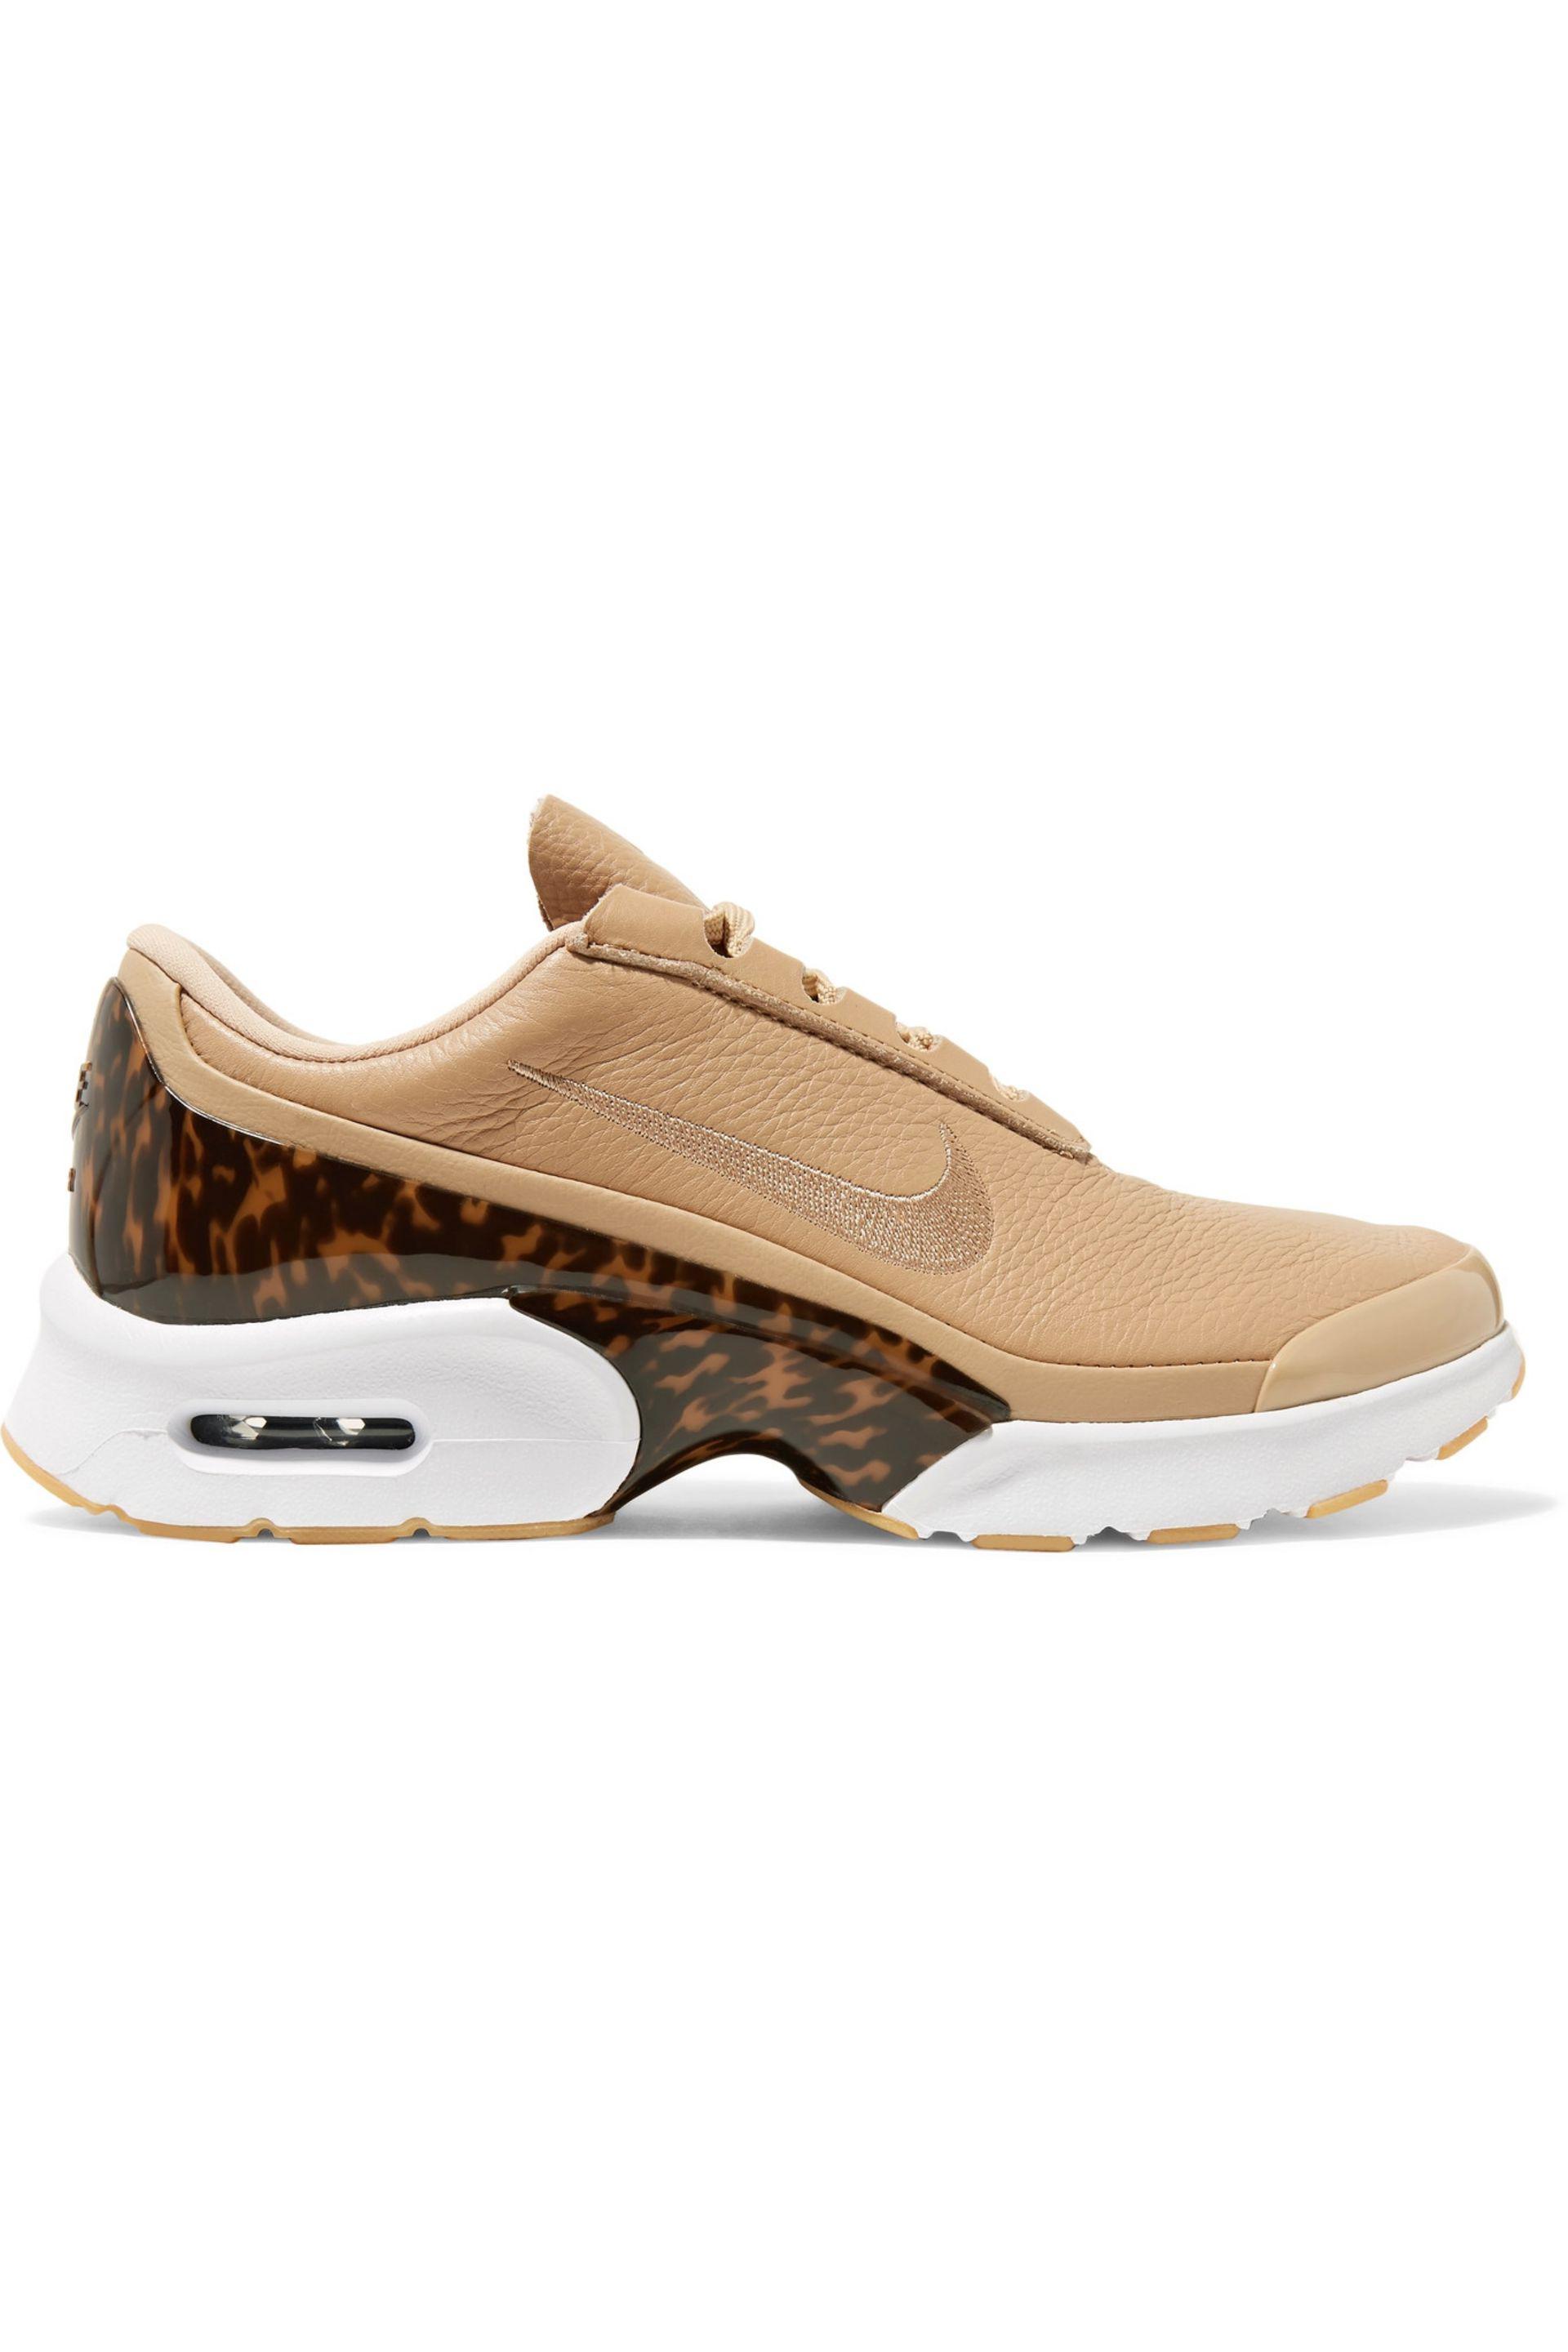 Nike Air Max Jewell Lx Leather And Tortoiseshell Plastic Sneakers in Beige  (Natural) - Lyst